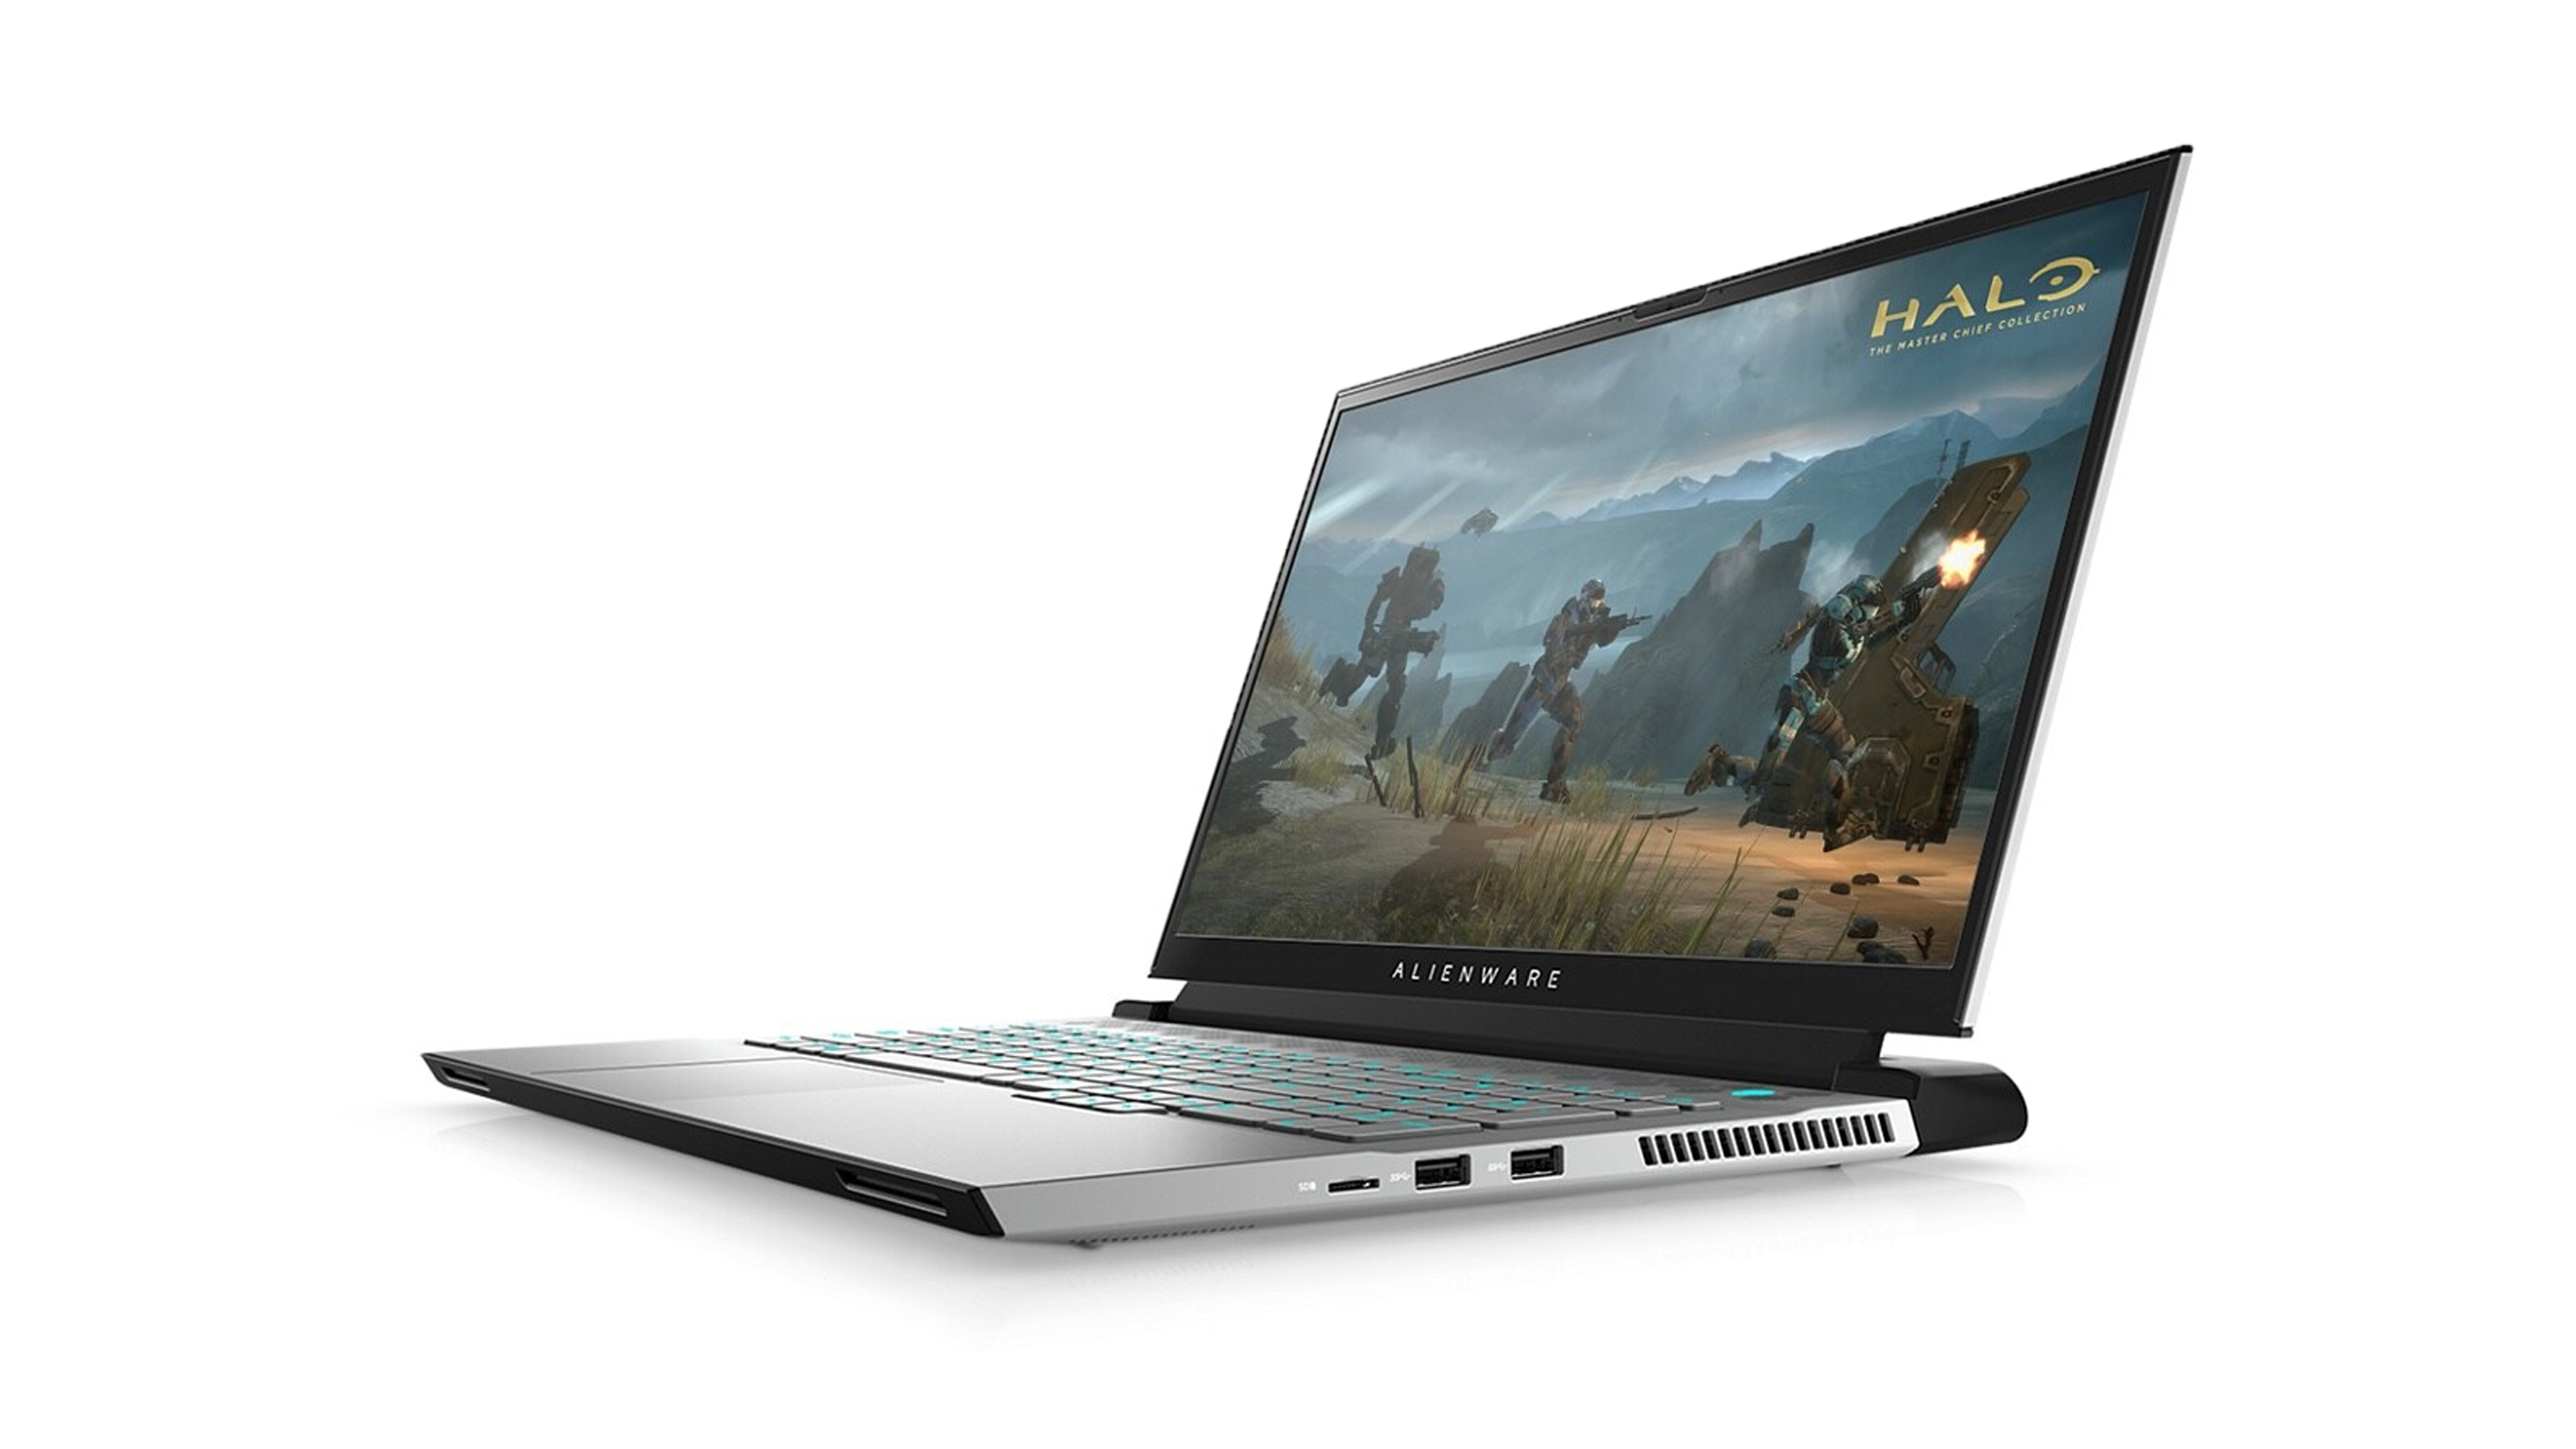 Alienware m17 R4 at an angle on a white background. The gaming laptop is open, with a screenshot of Halo: The Master Chief Collection. You can see the right-side ports, along with some ventilation.